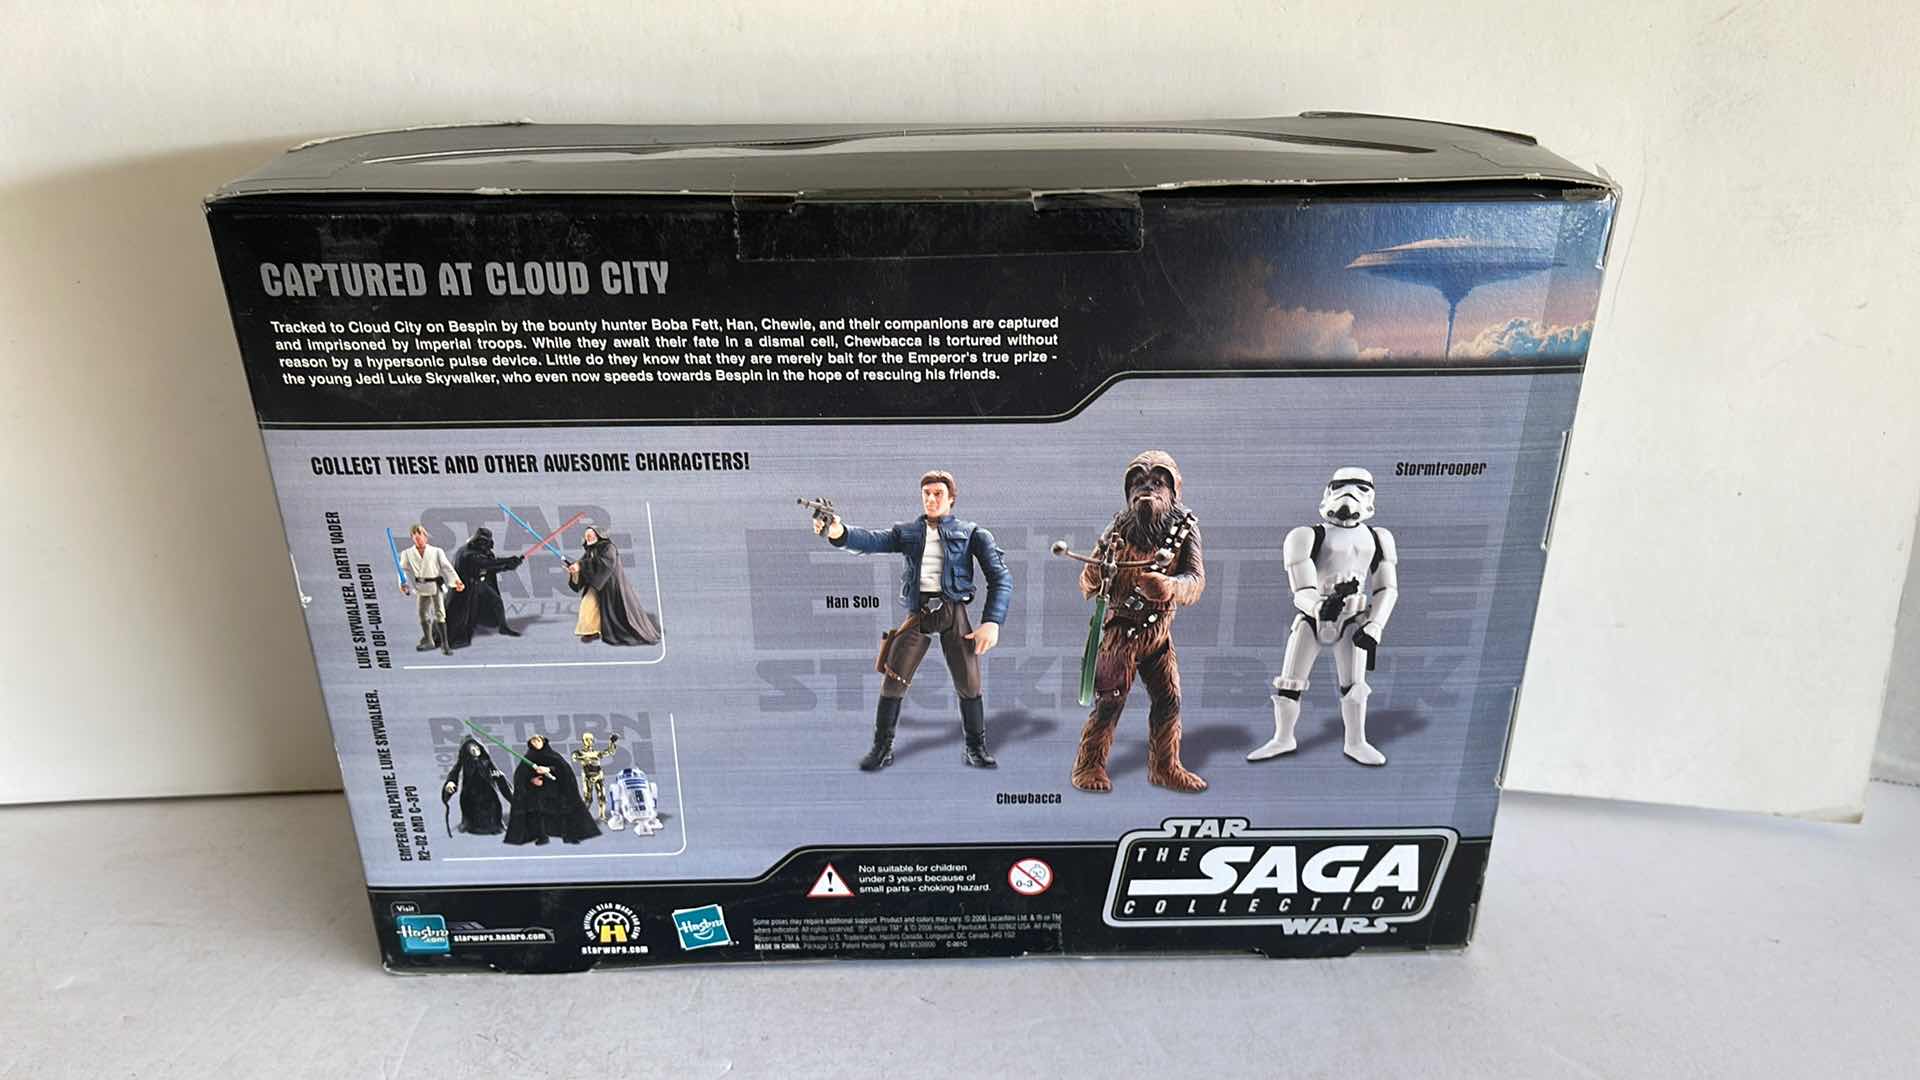 Photo 2 of NIB STAR WAR V THE EMPIRE STRIKES THE SAGA COLLECTION BACK HAN SOLO CHEWBACCA AND STORMTROOPER MSRP $25